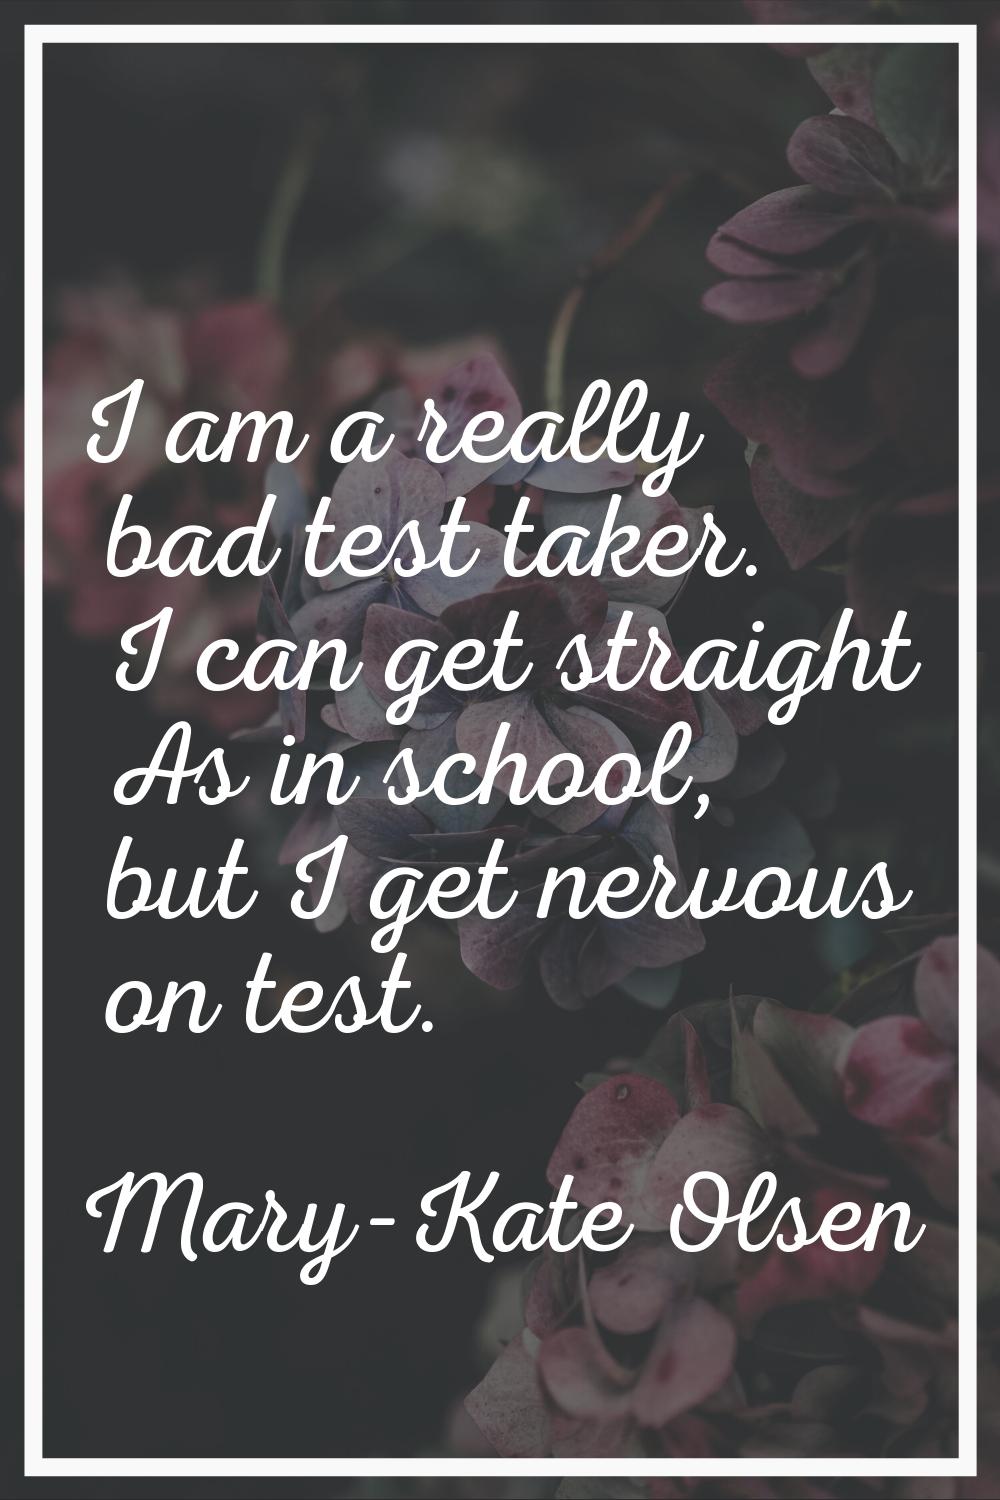 I am a really bad test taker. I can get straight As in school, but I get nervous on test.